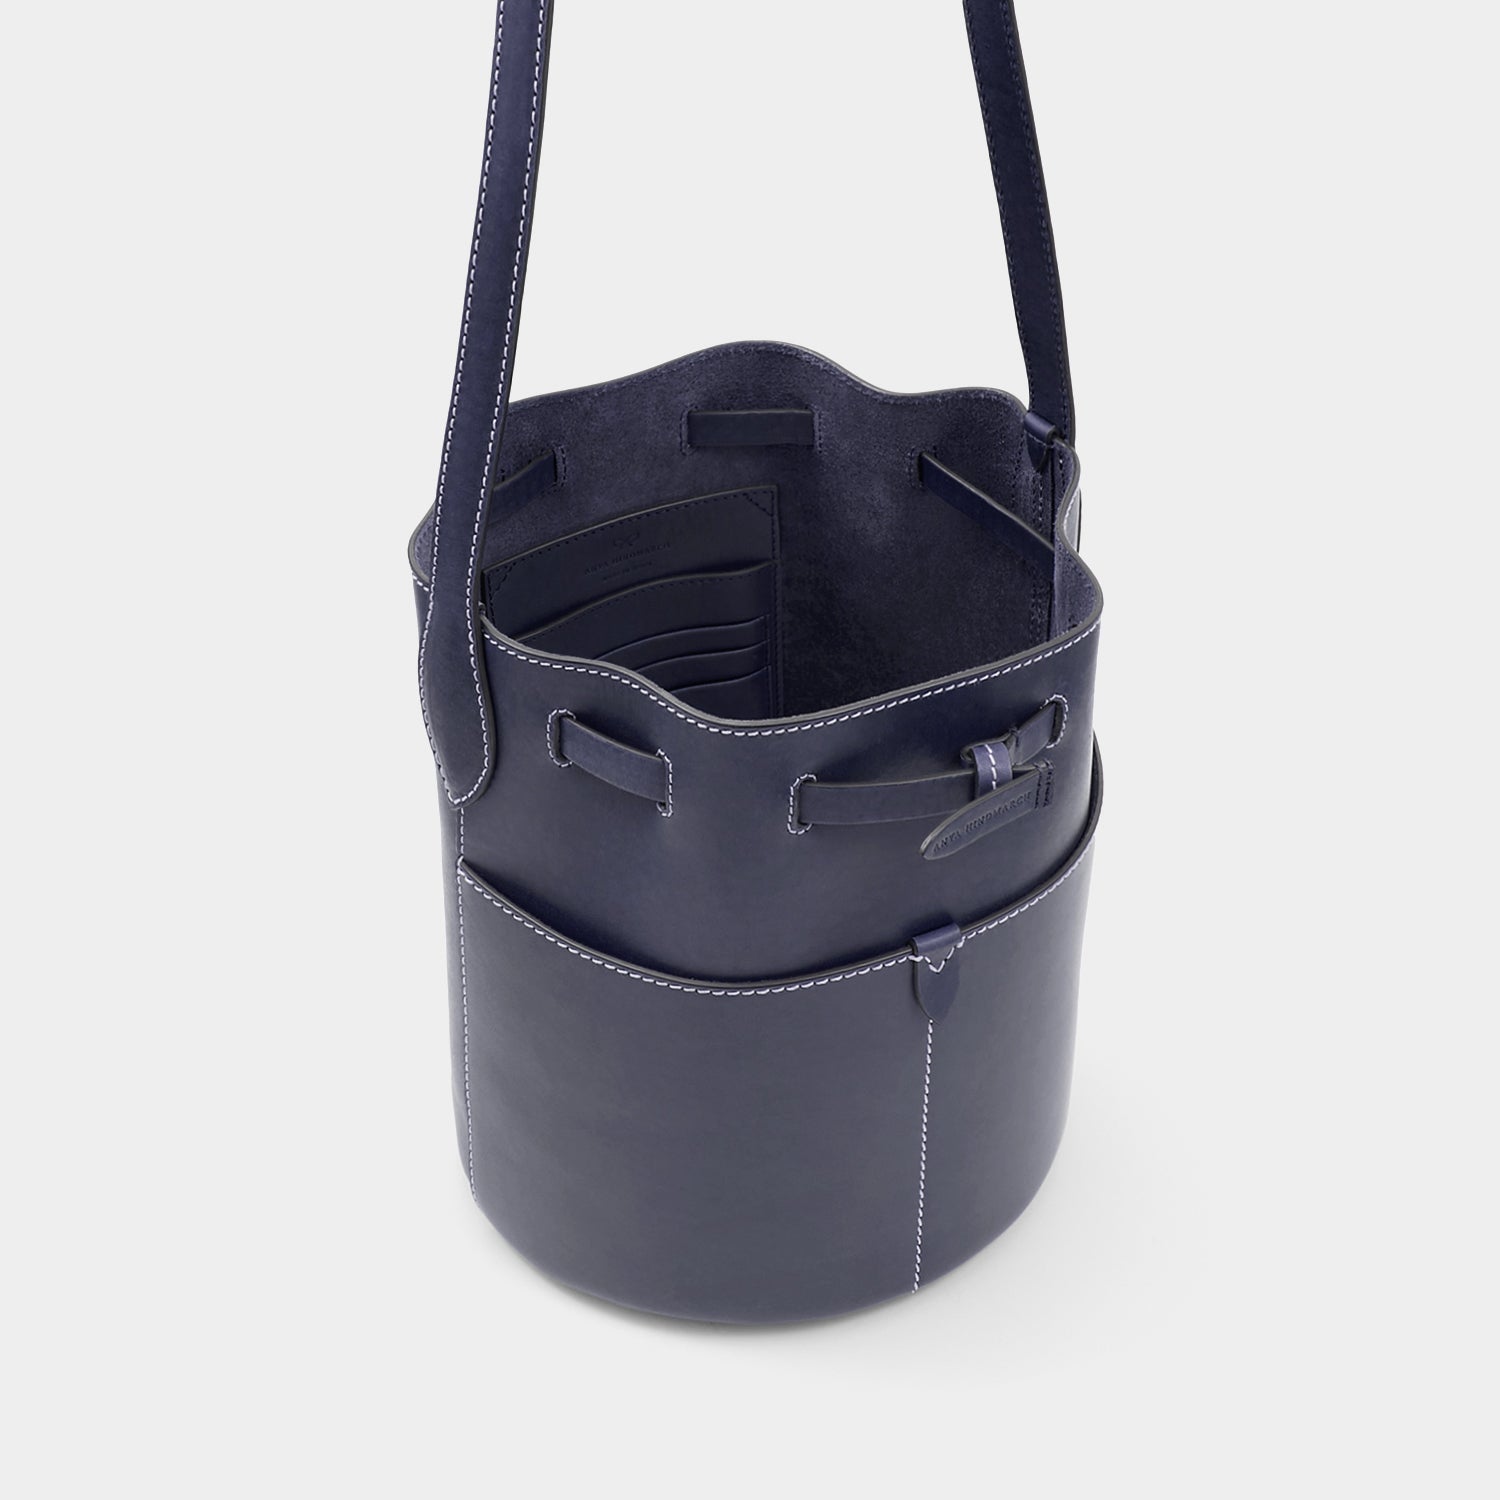 Return to Nature Small Bucket Bag -

                  
                    Compostable Leather in Marine -
                  

                  Anya Hindmarch EU
